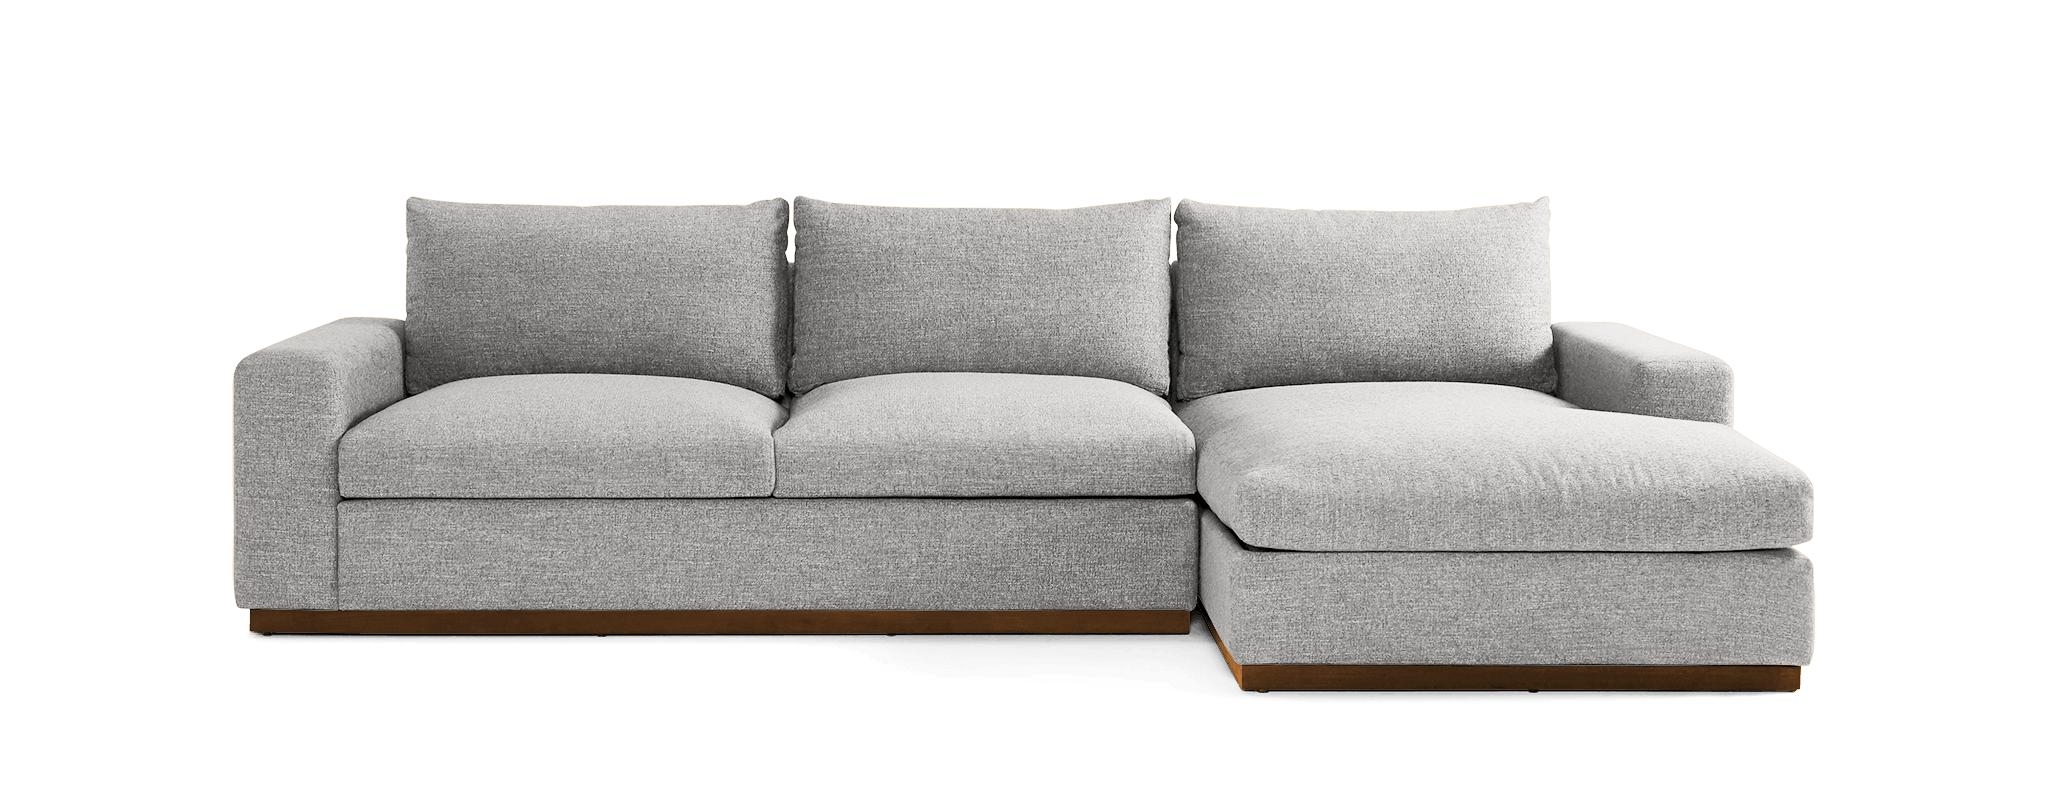 Holt Sectional with Storage - Milo Dove - Image 0